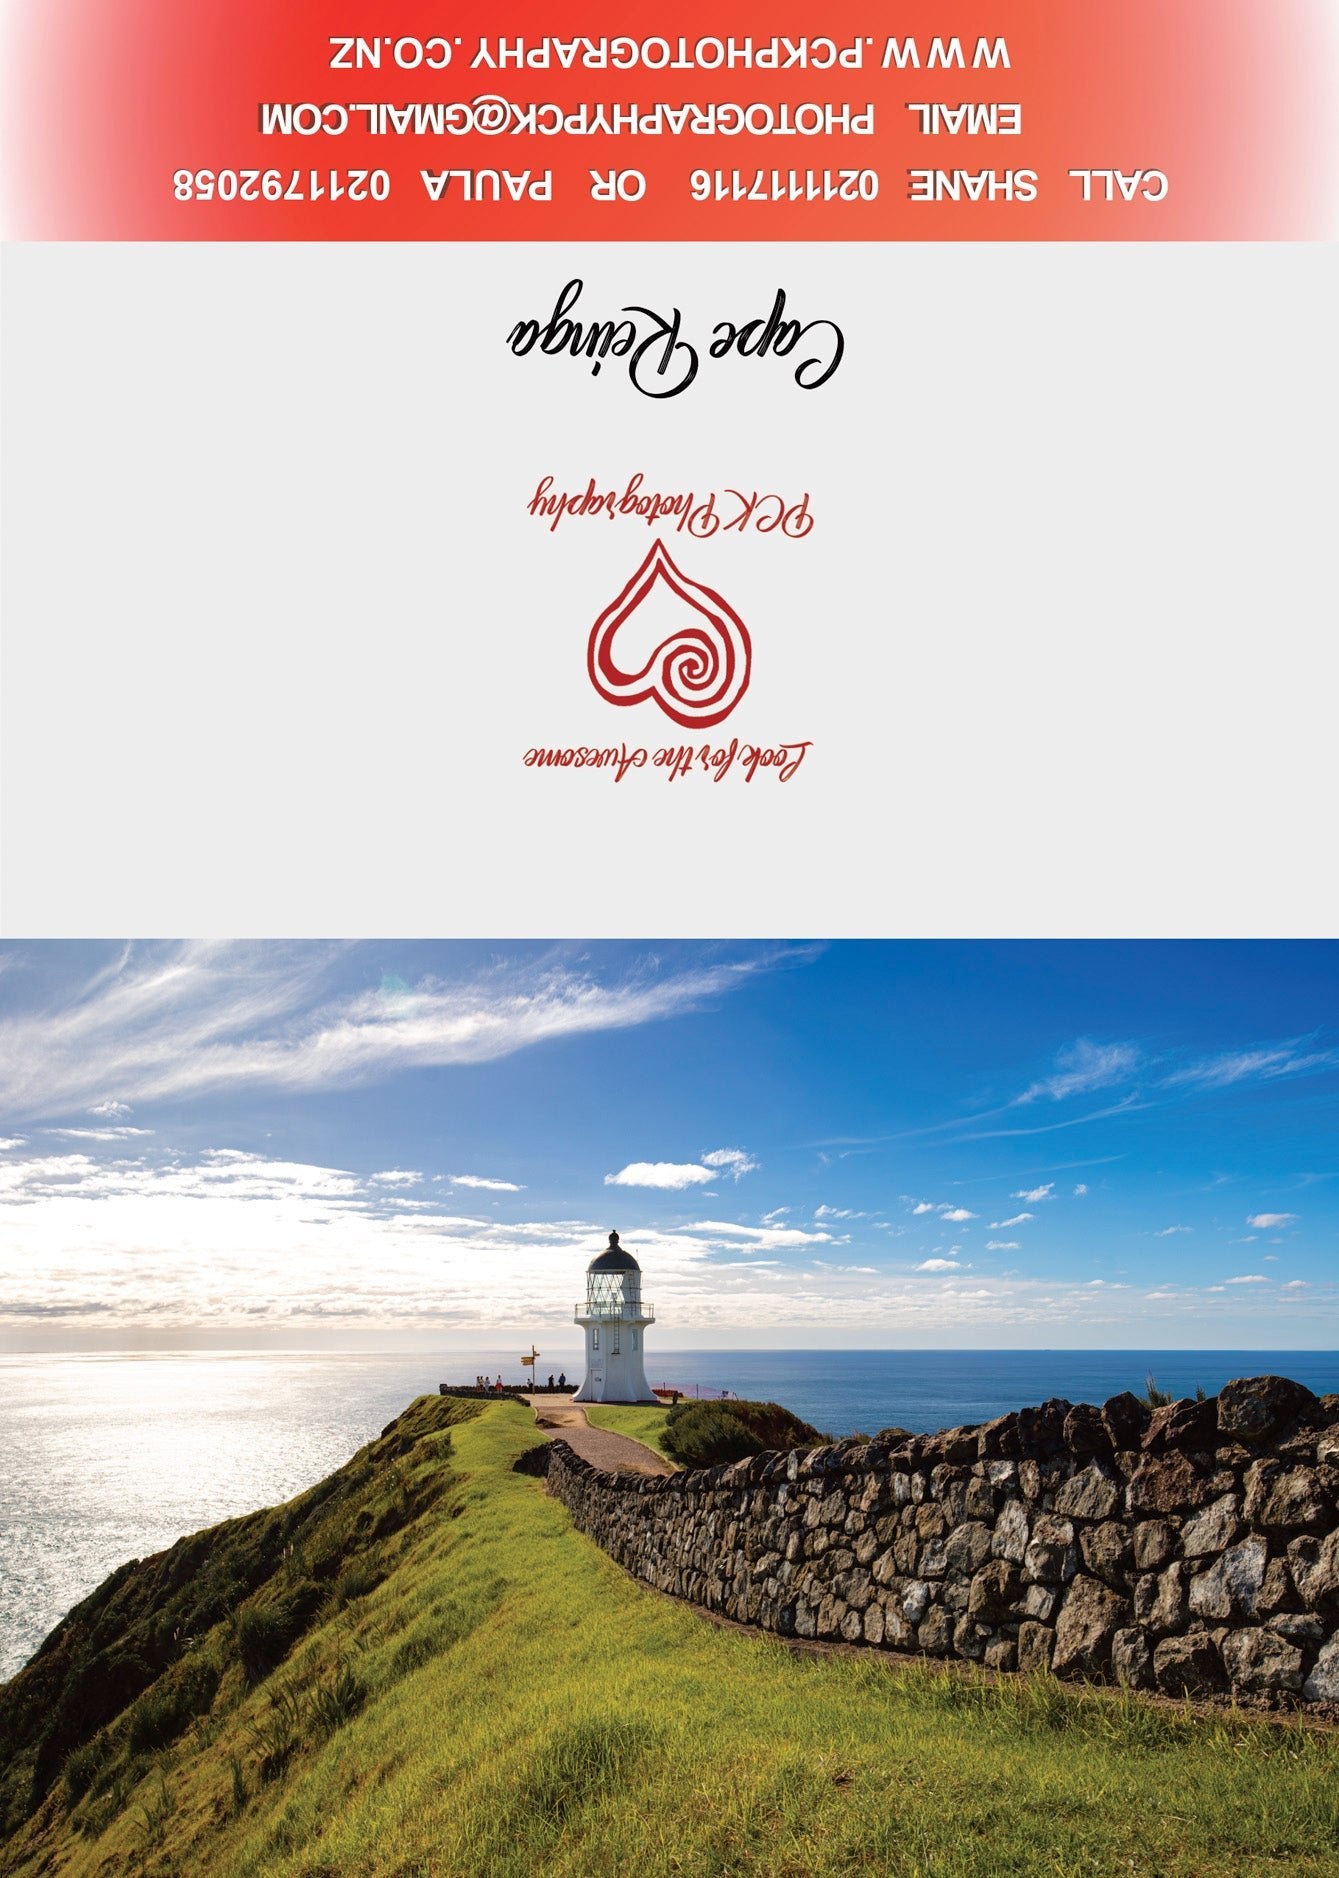 Cape Reinga Wall Greeting Card - PCK Photography